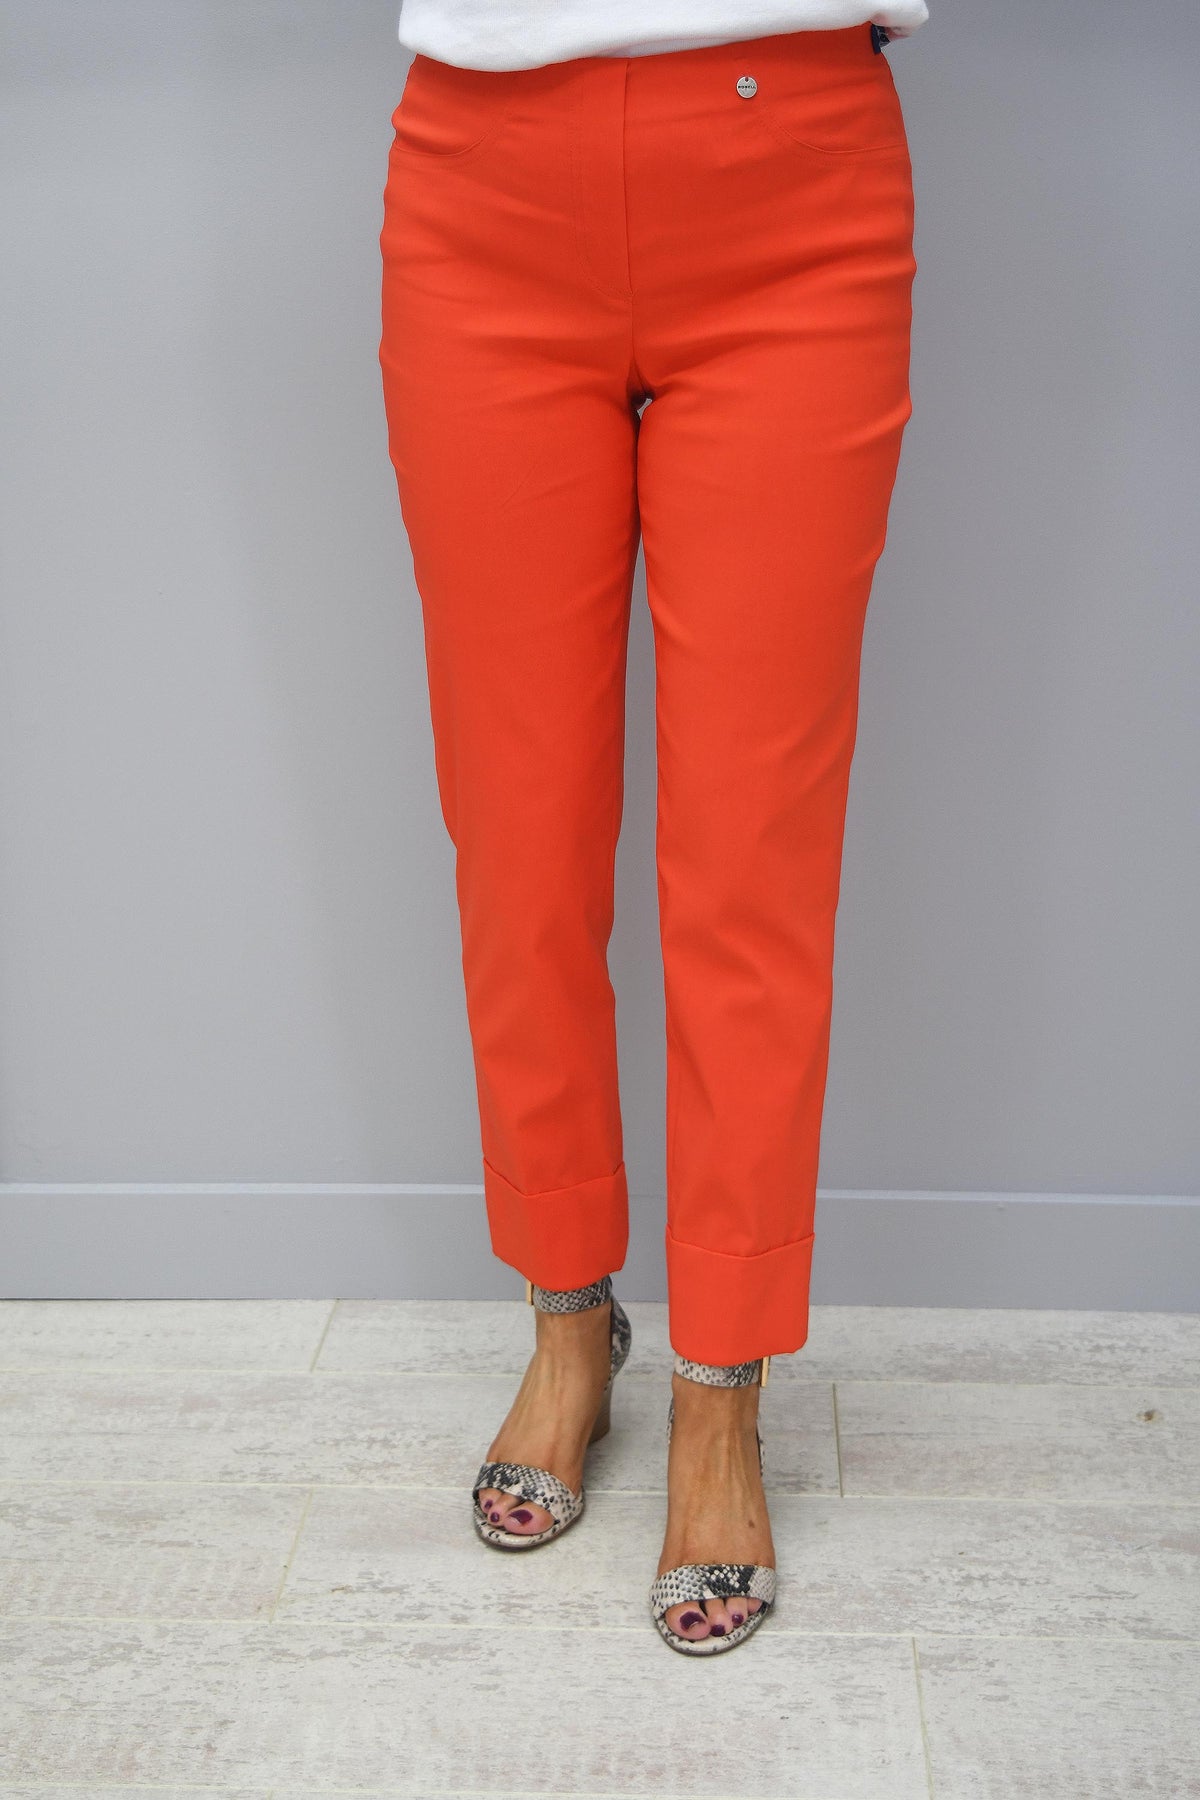 Clogger Zero Light and Cool Women's Chainsaw Pants in Hi Vis Orange